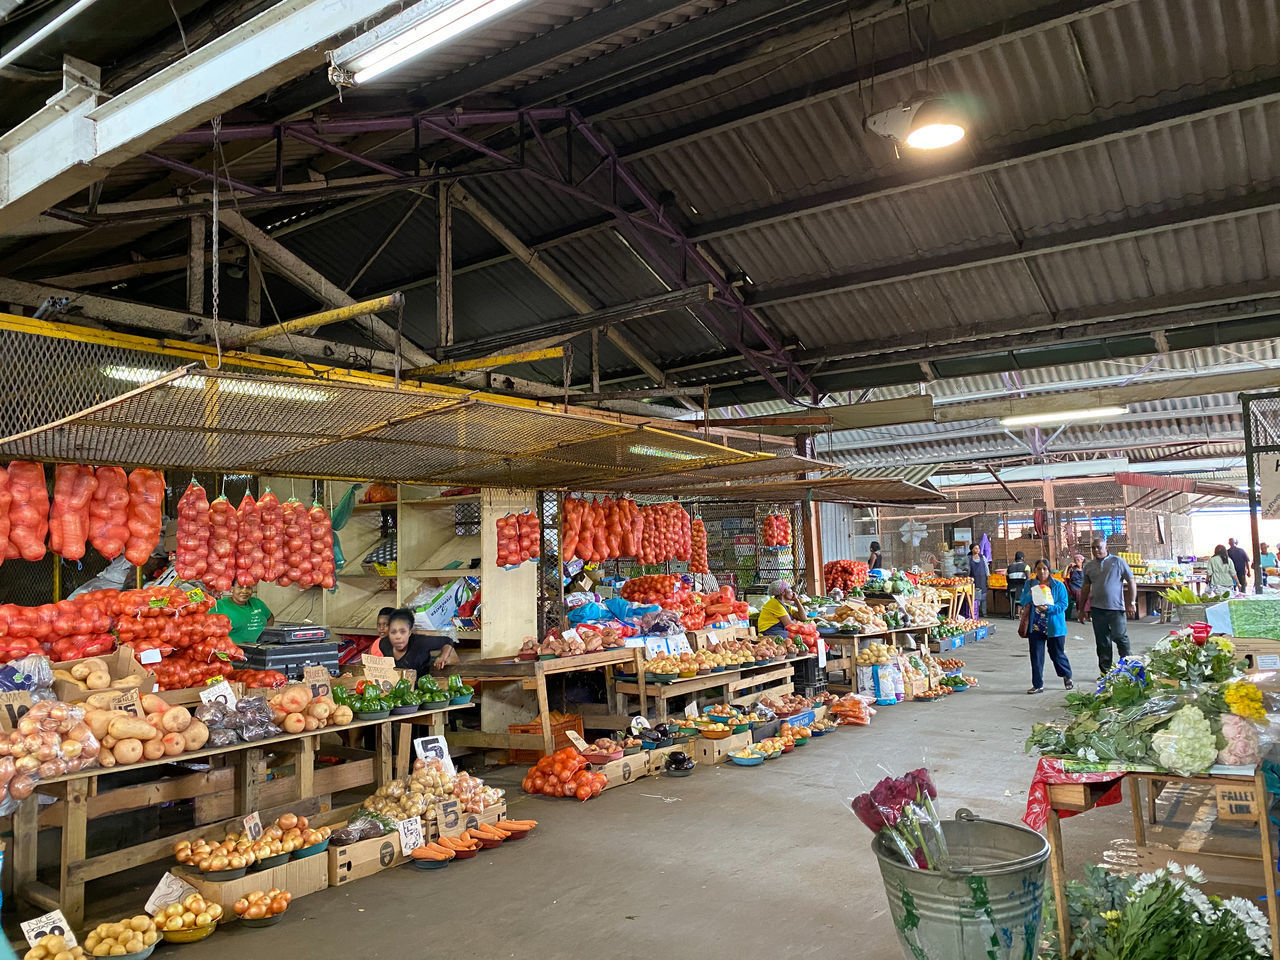 VIEW OF MARKET STALL